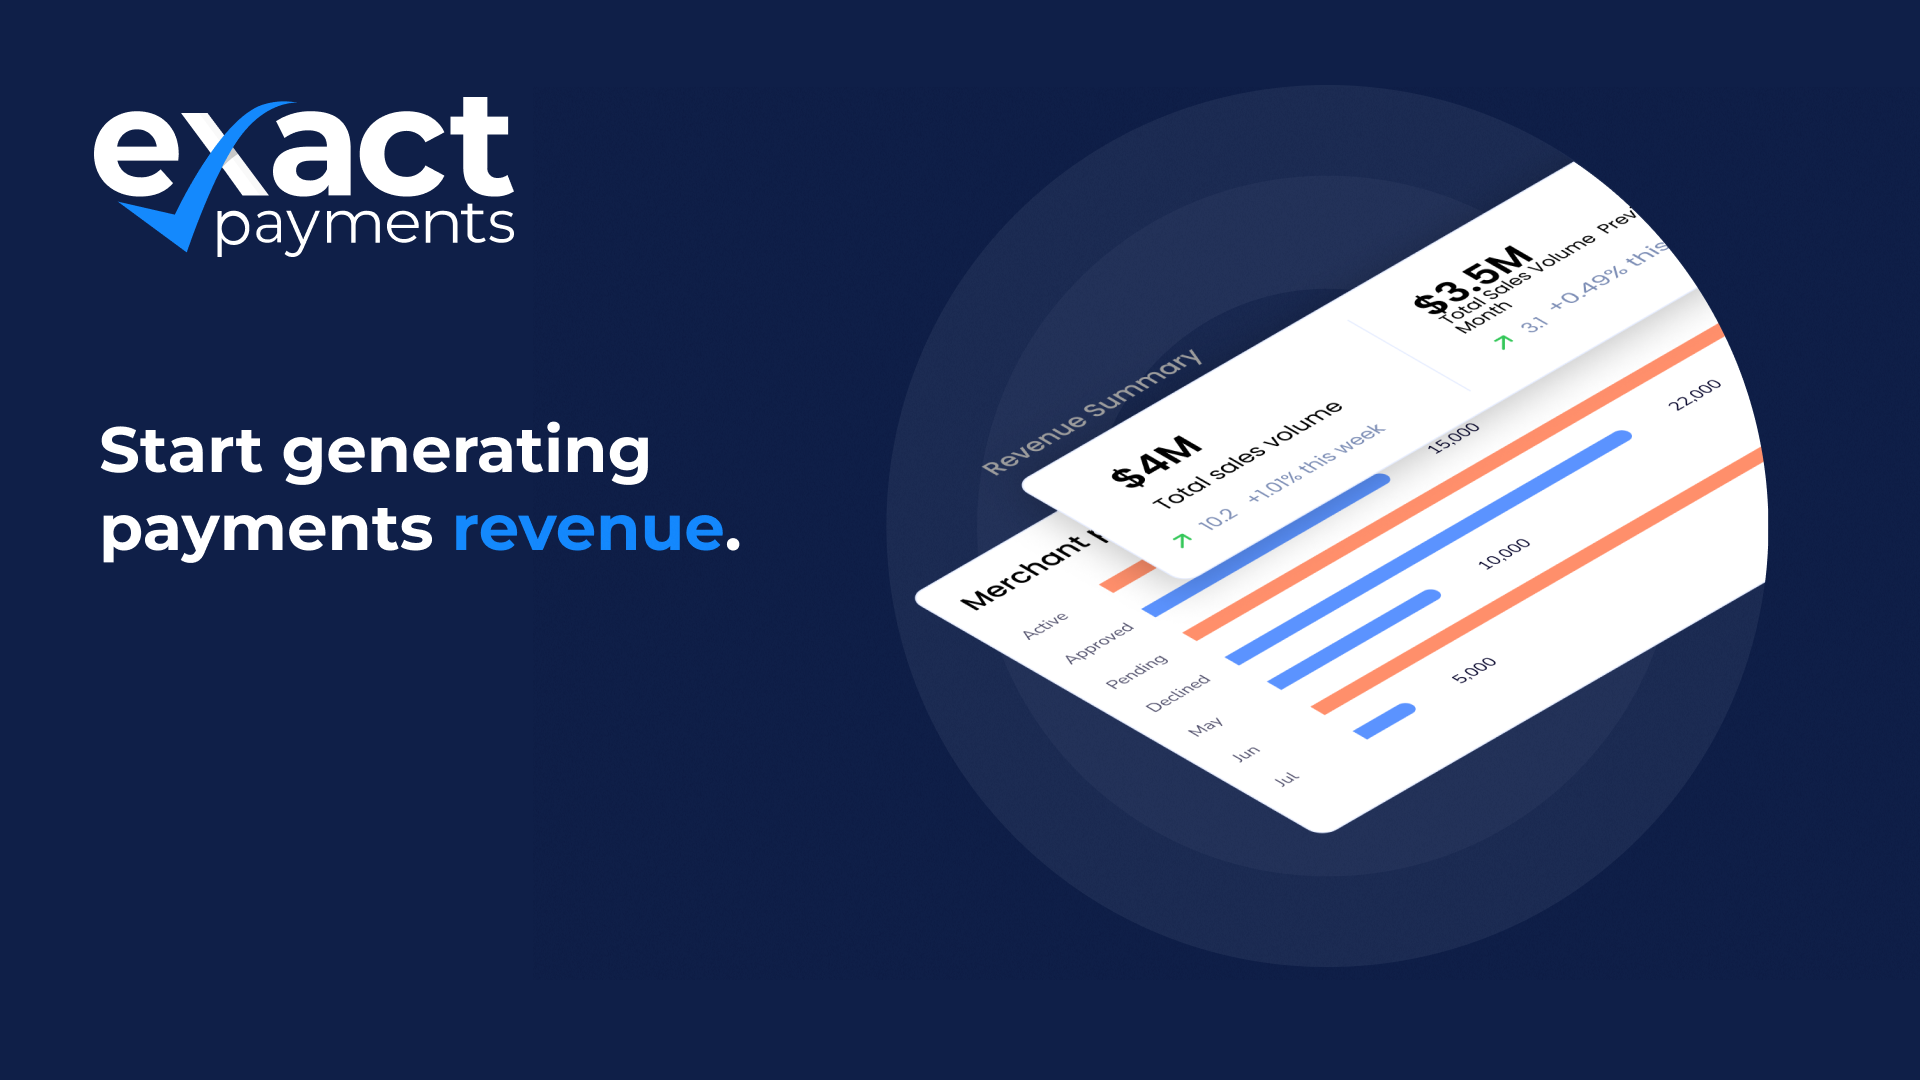 Flexible pricing models enable you to earn compelling margins on your portfolio. Tap a new revenue stream from the payments processed on your platform.